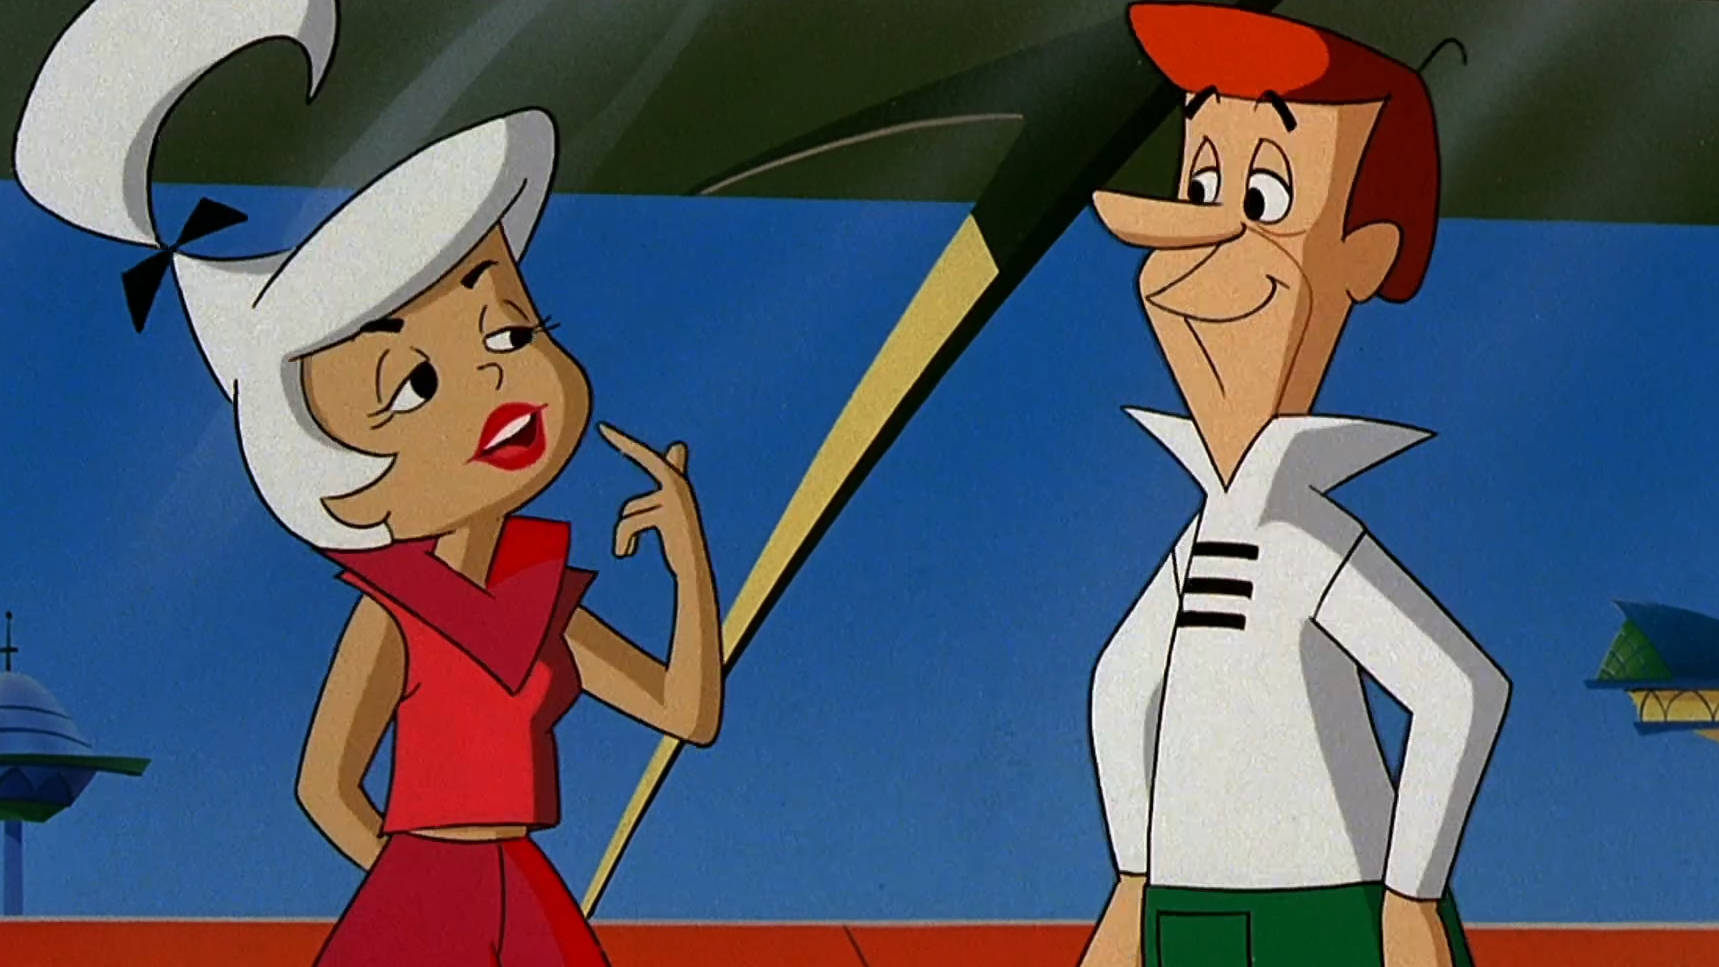 Download Caption: George Jetson and his daughter Judy sharing a special moment. Wallpaper